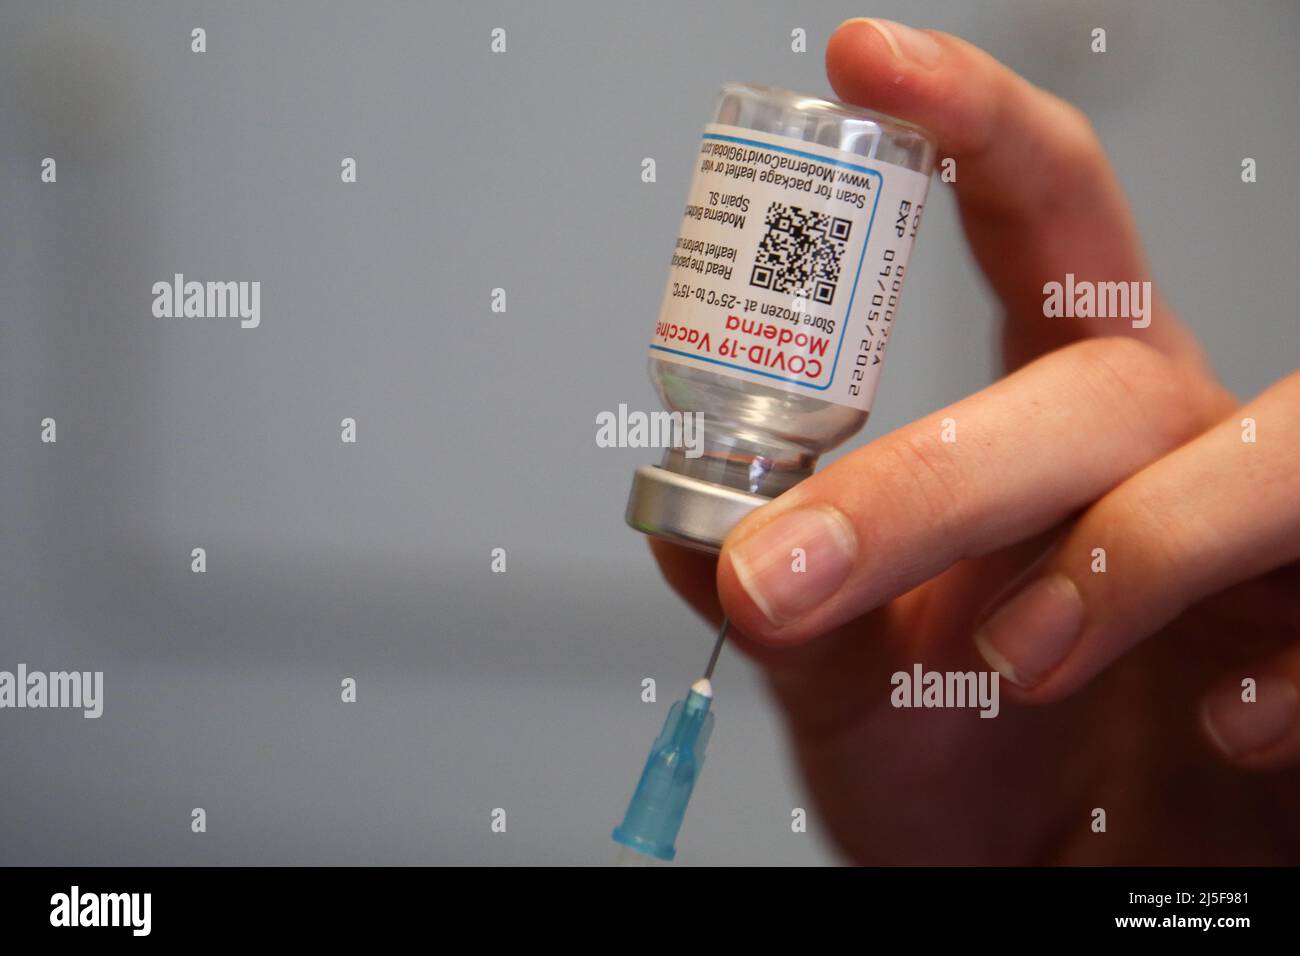 London, UK 22 Apr 2022 - A vaccinator draws the Spikevax (Moderna) COVID-19 vaccine as she prepares to administer the spring booster jab to a person at a vaccination centre. Credit Dinendra Haria /Alamy Live News Stock Photo